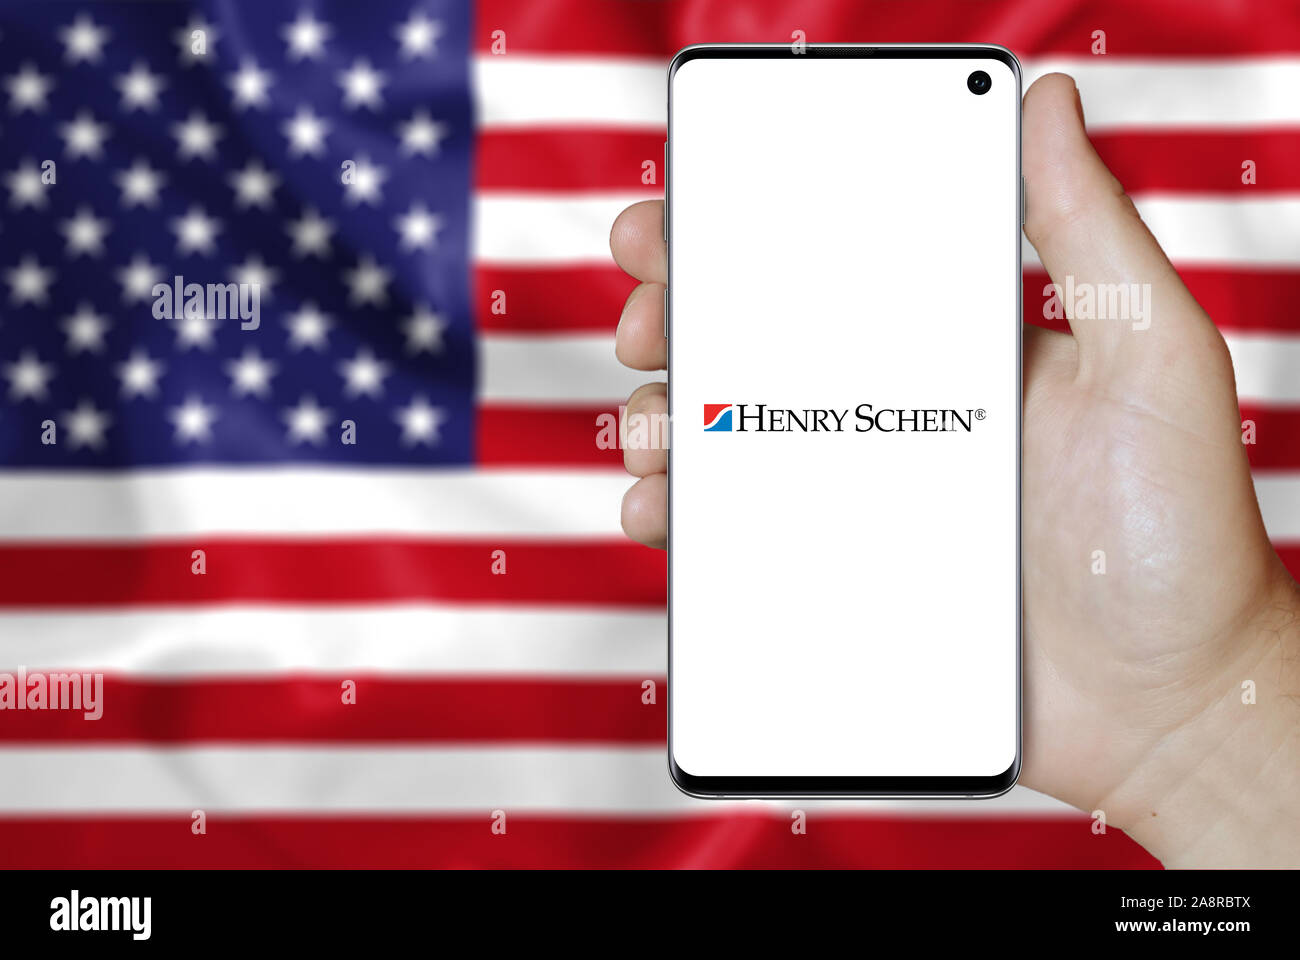 Logo of public company Henry Schein displayed on a smartphone. Flag of USA background. Credit: PIXDUCE Stock Photo